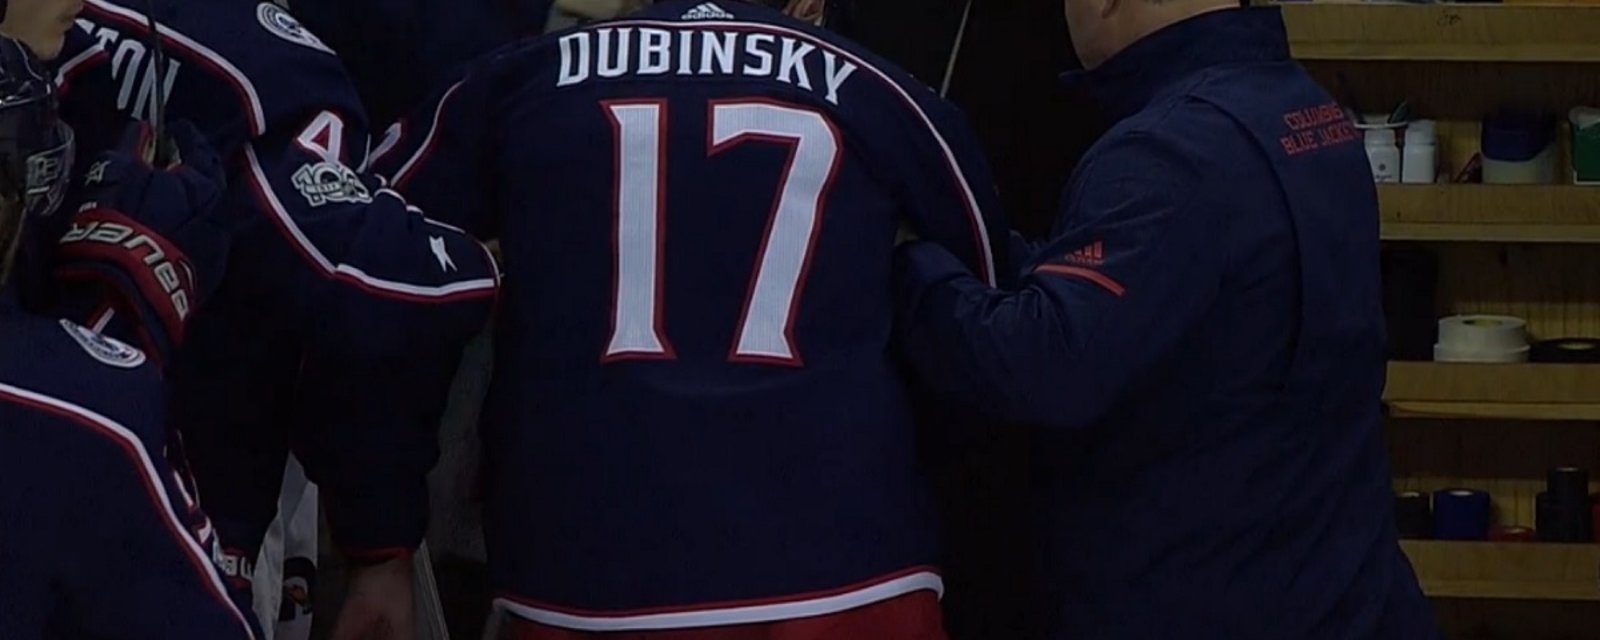 Dubinsky doesn't know where he is after taking a beating from Kassian.